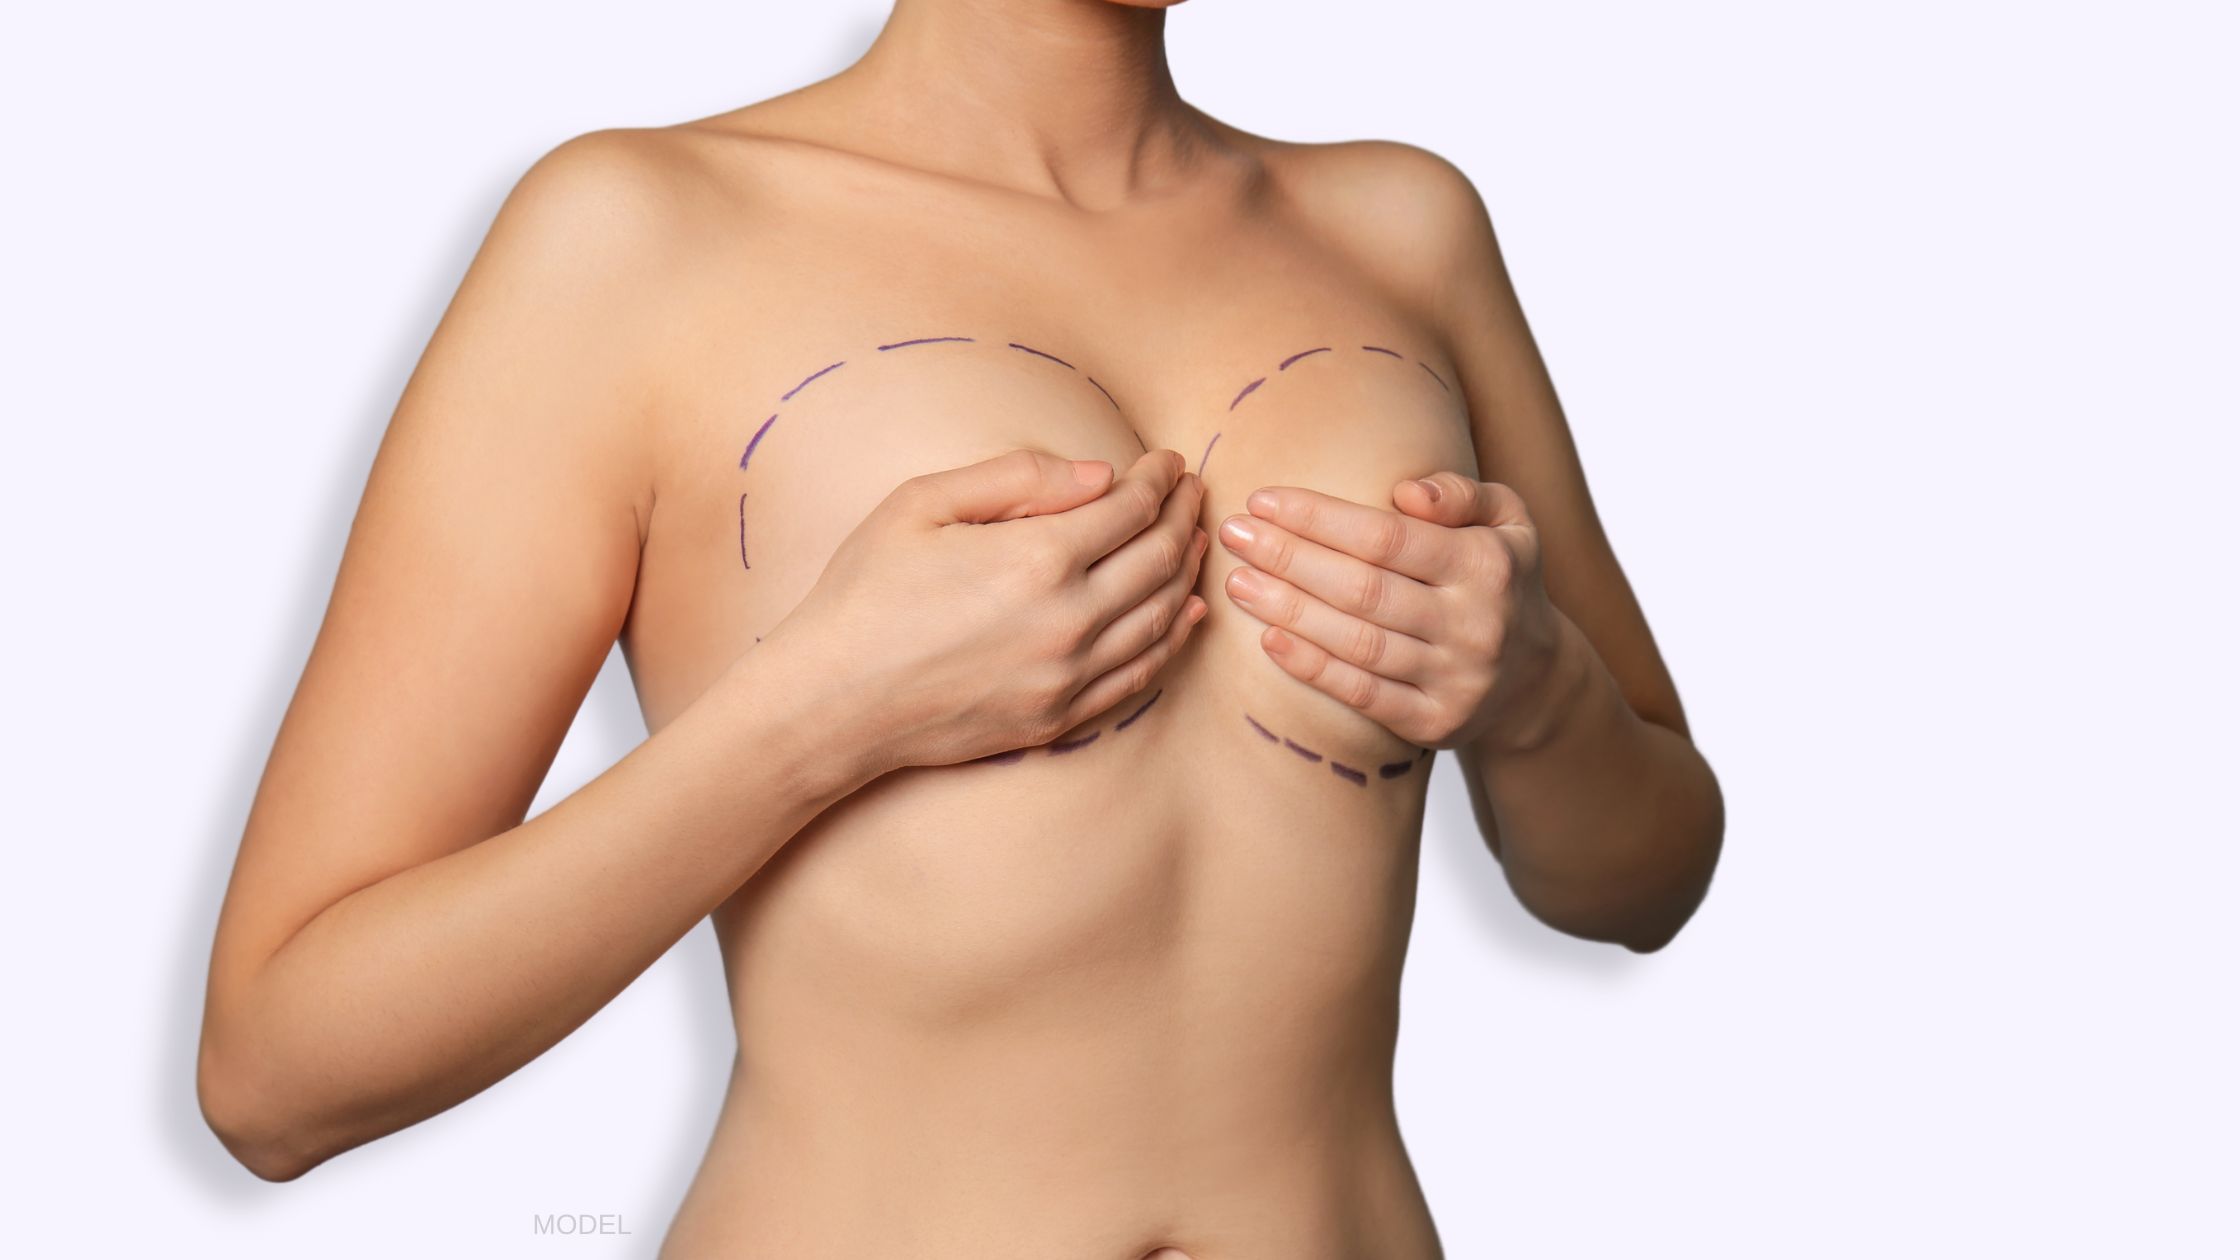 Options for Droopy Breasts - Breast Lift, Implants or Both?